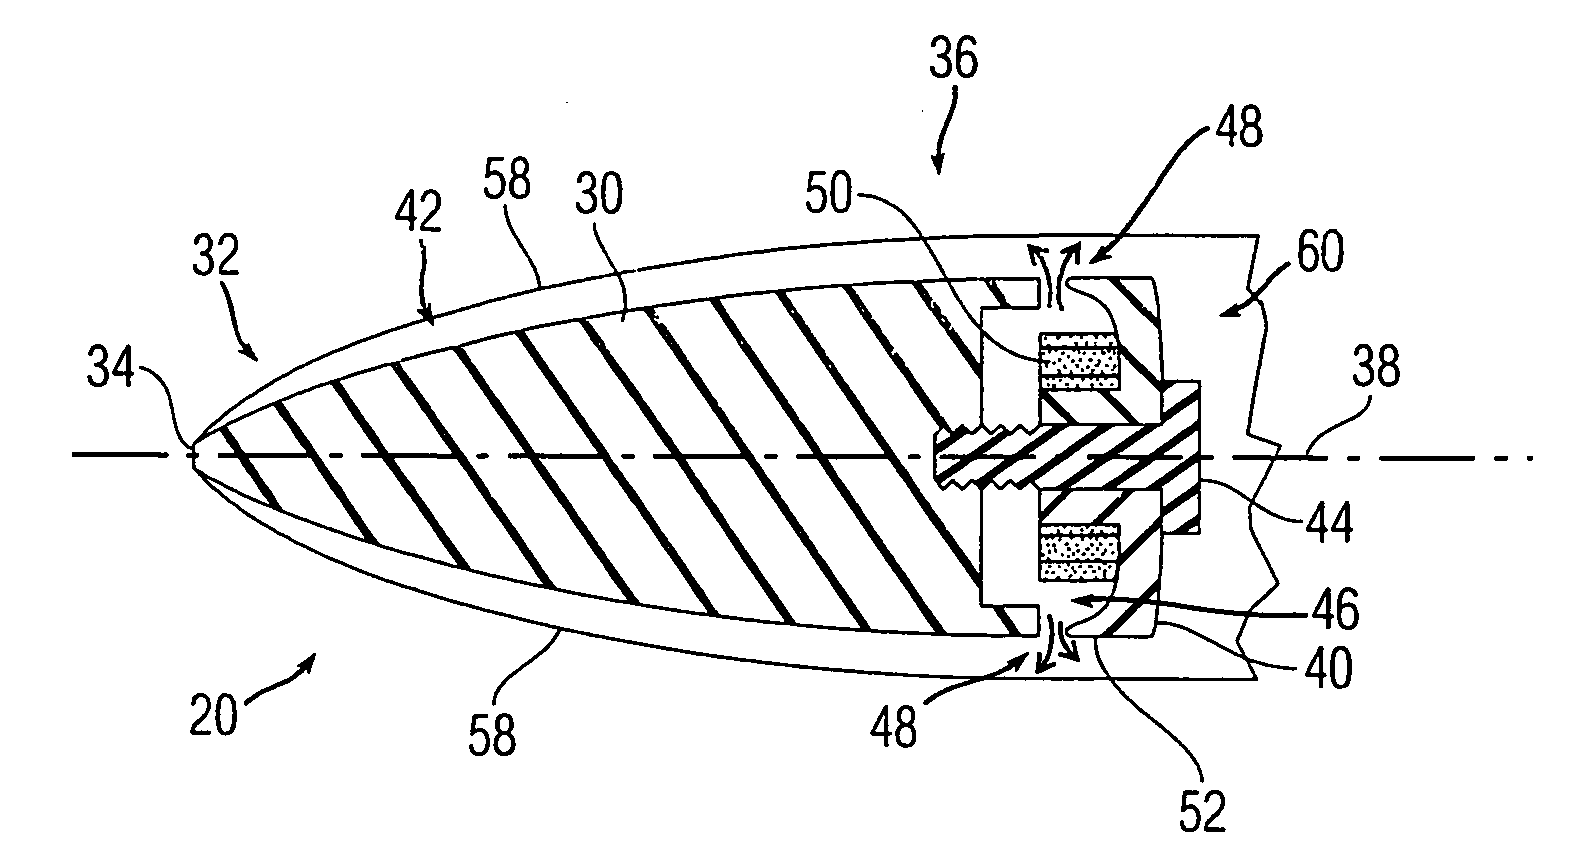 Projectile with tail-mounted gas generator assembly